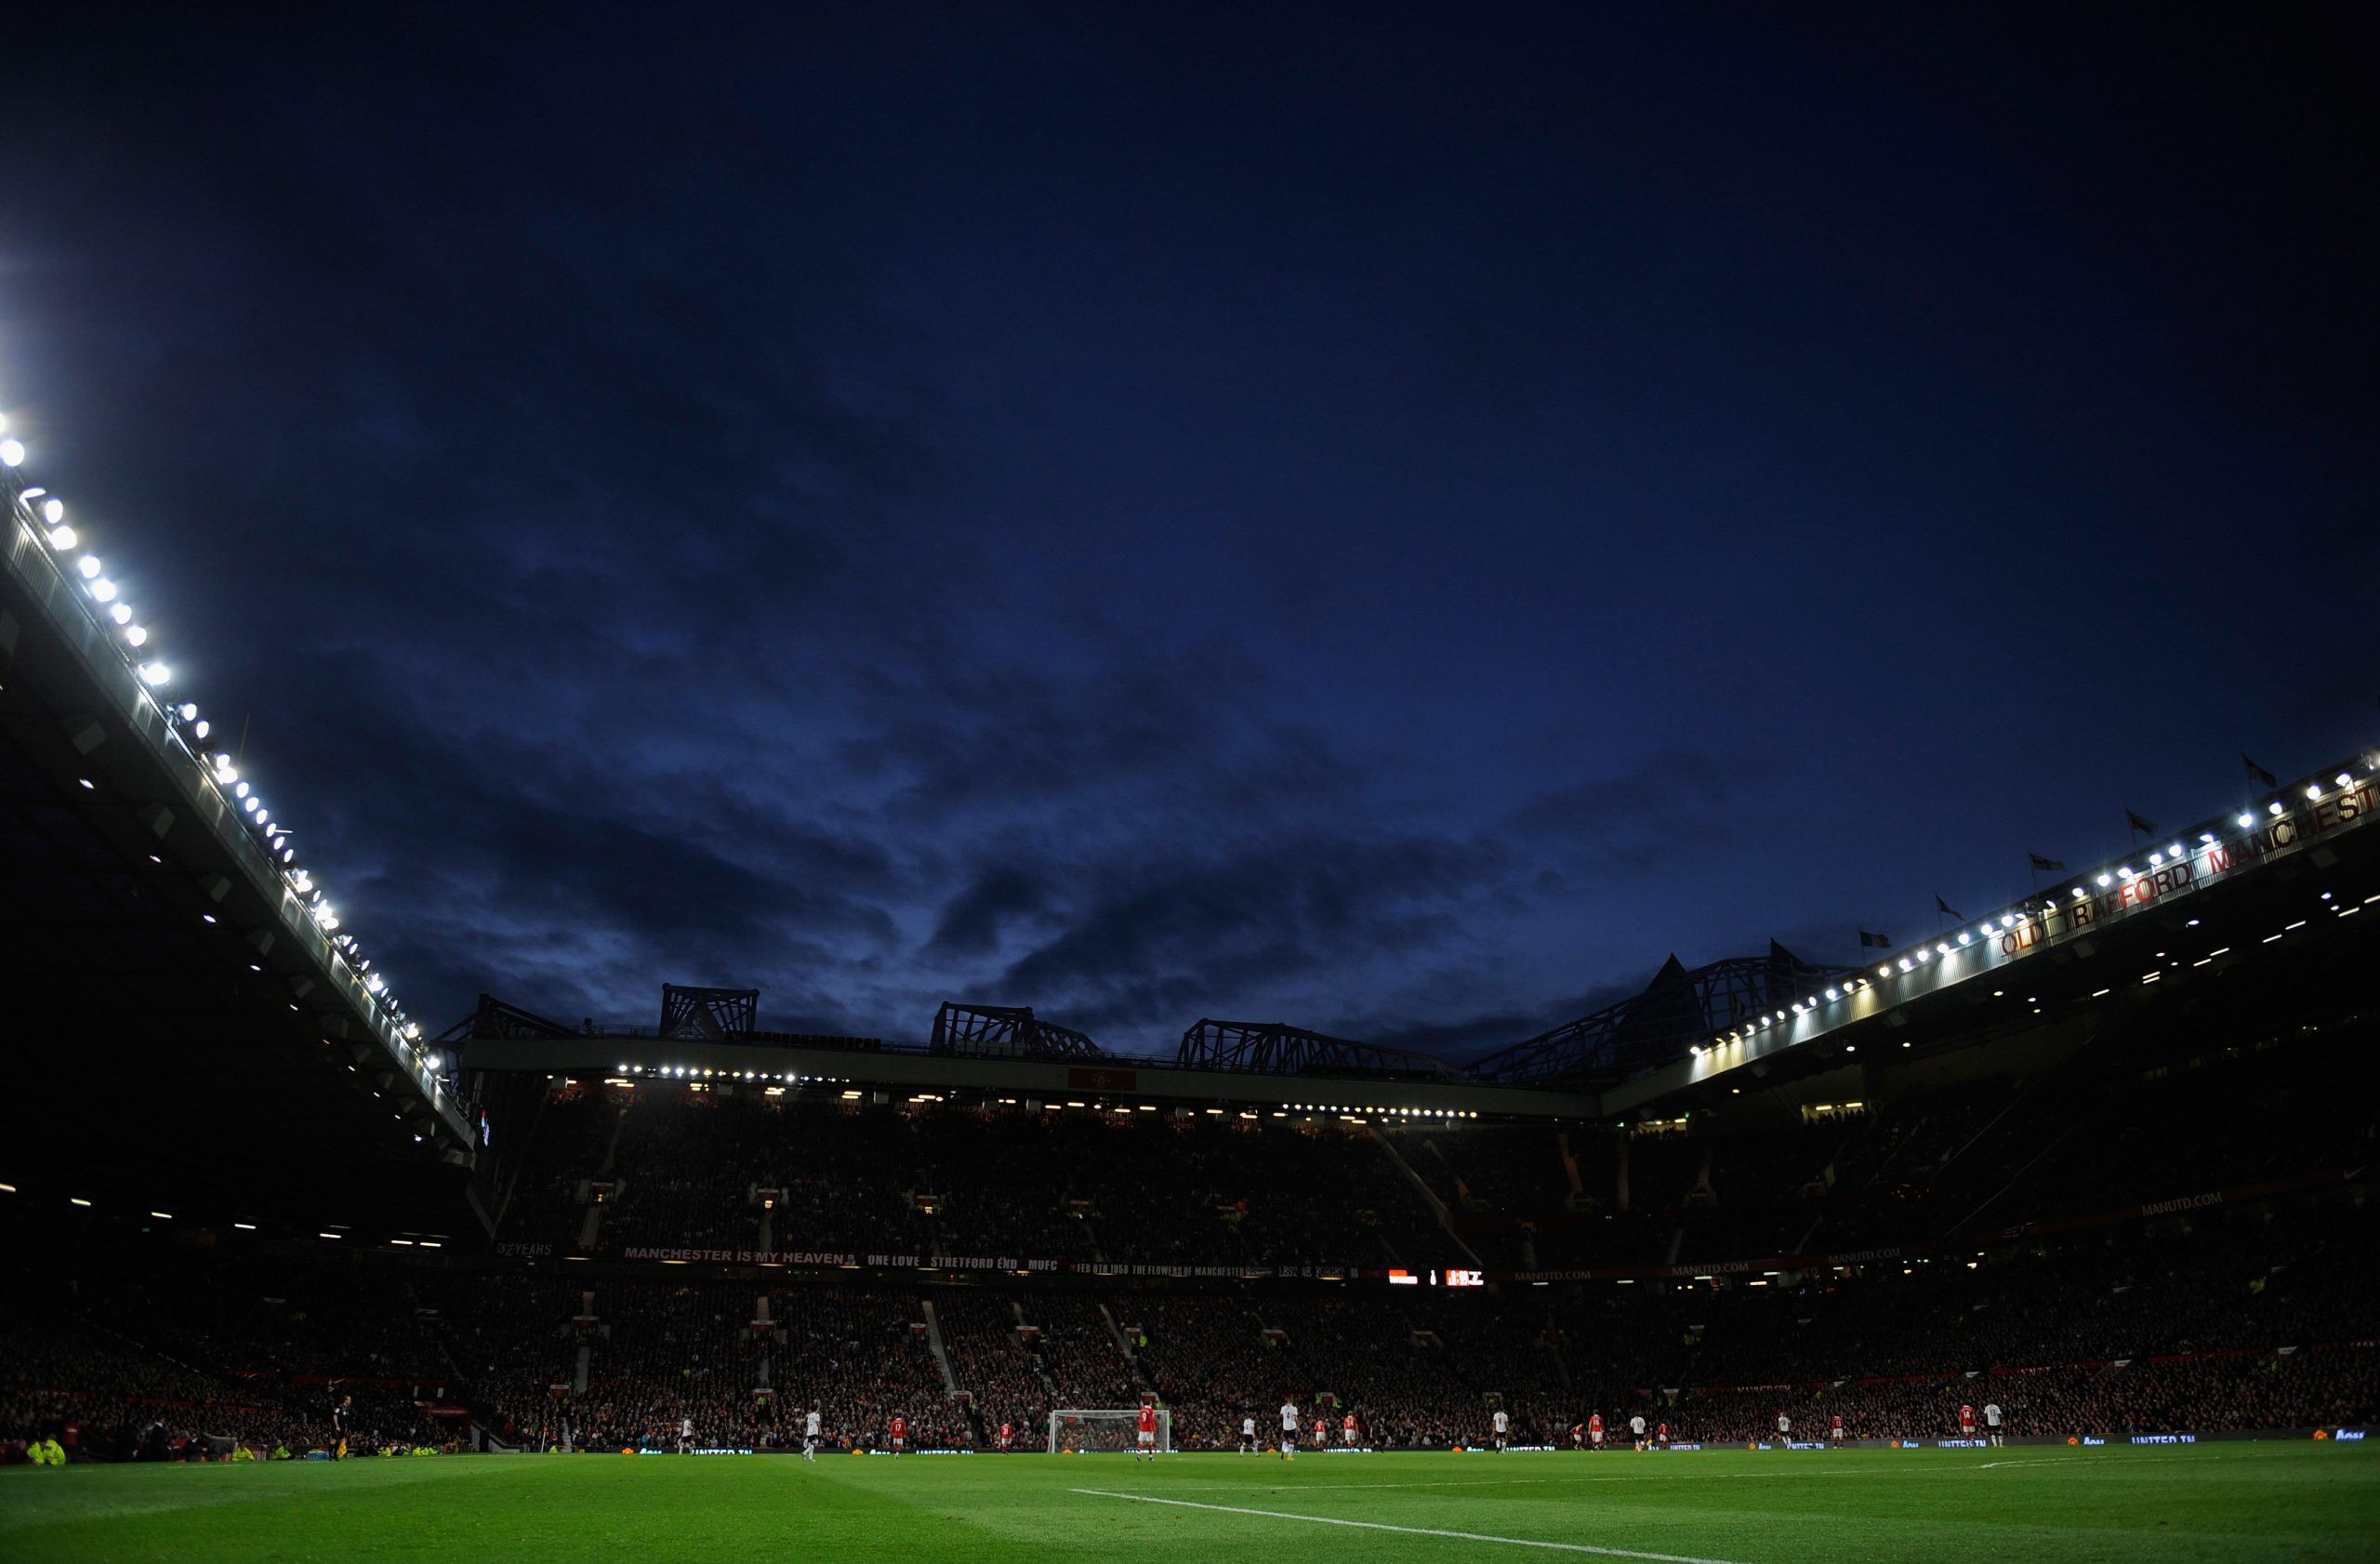 Old Trafford is one of the most famous football stadiums in the world - Soccer